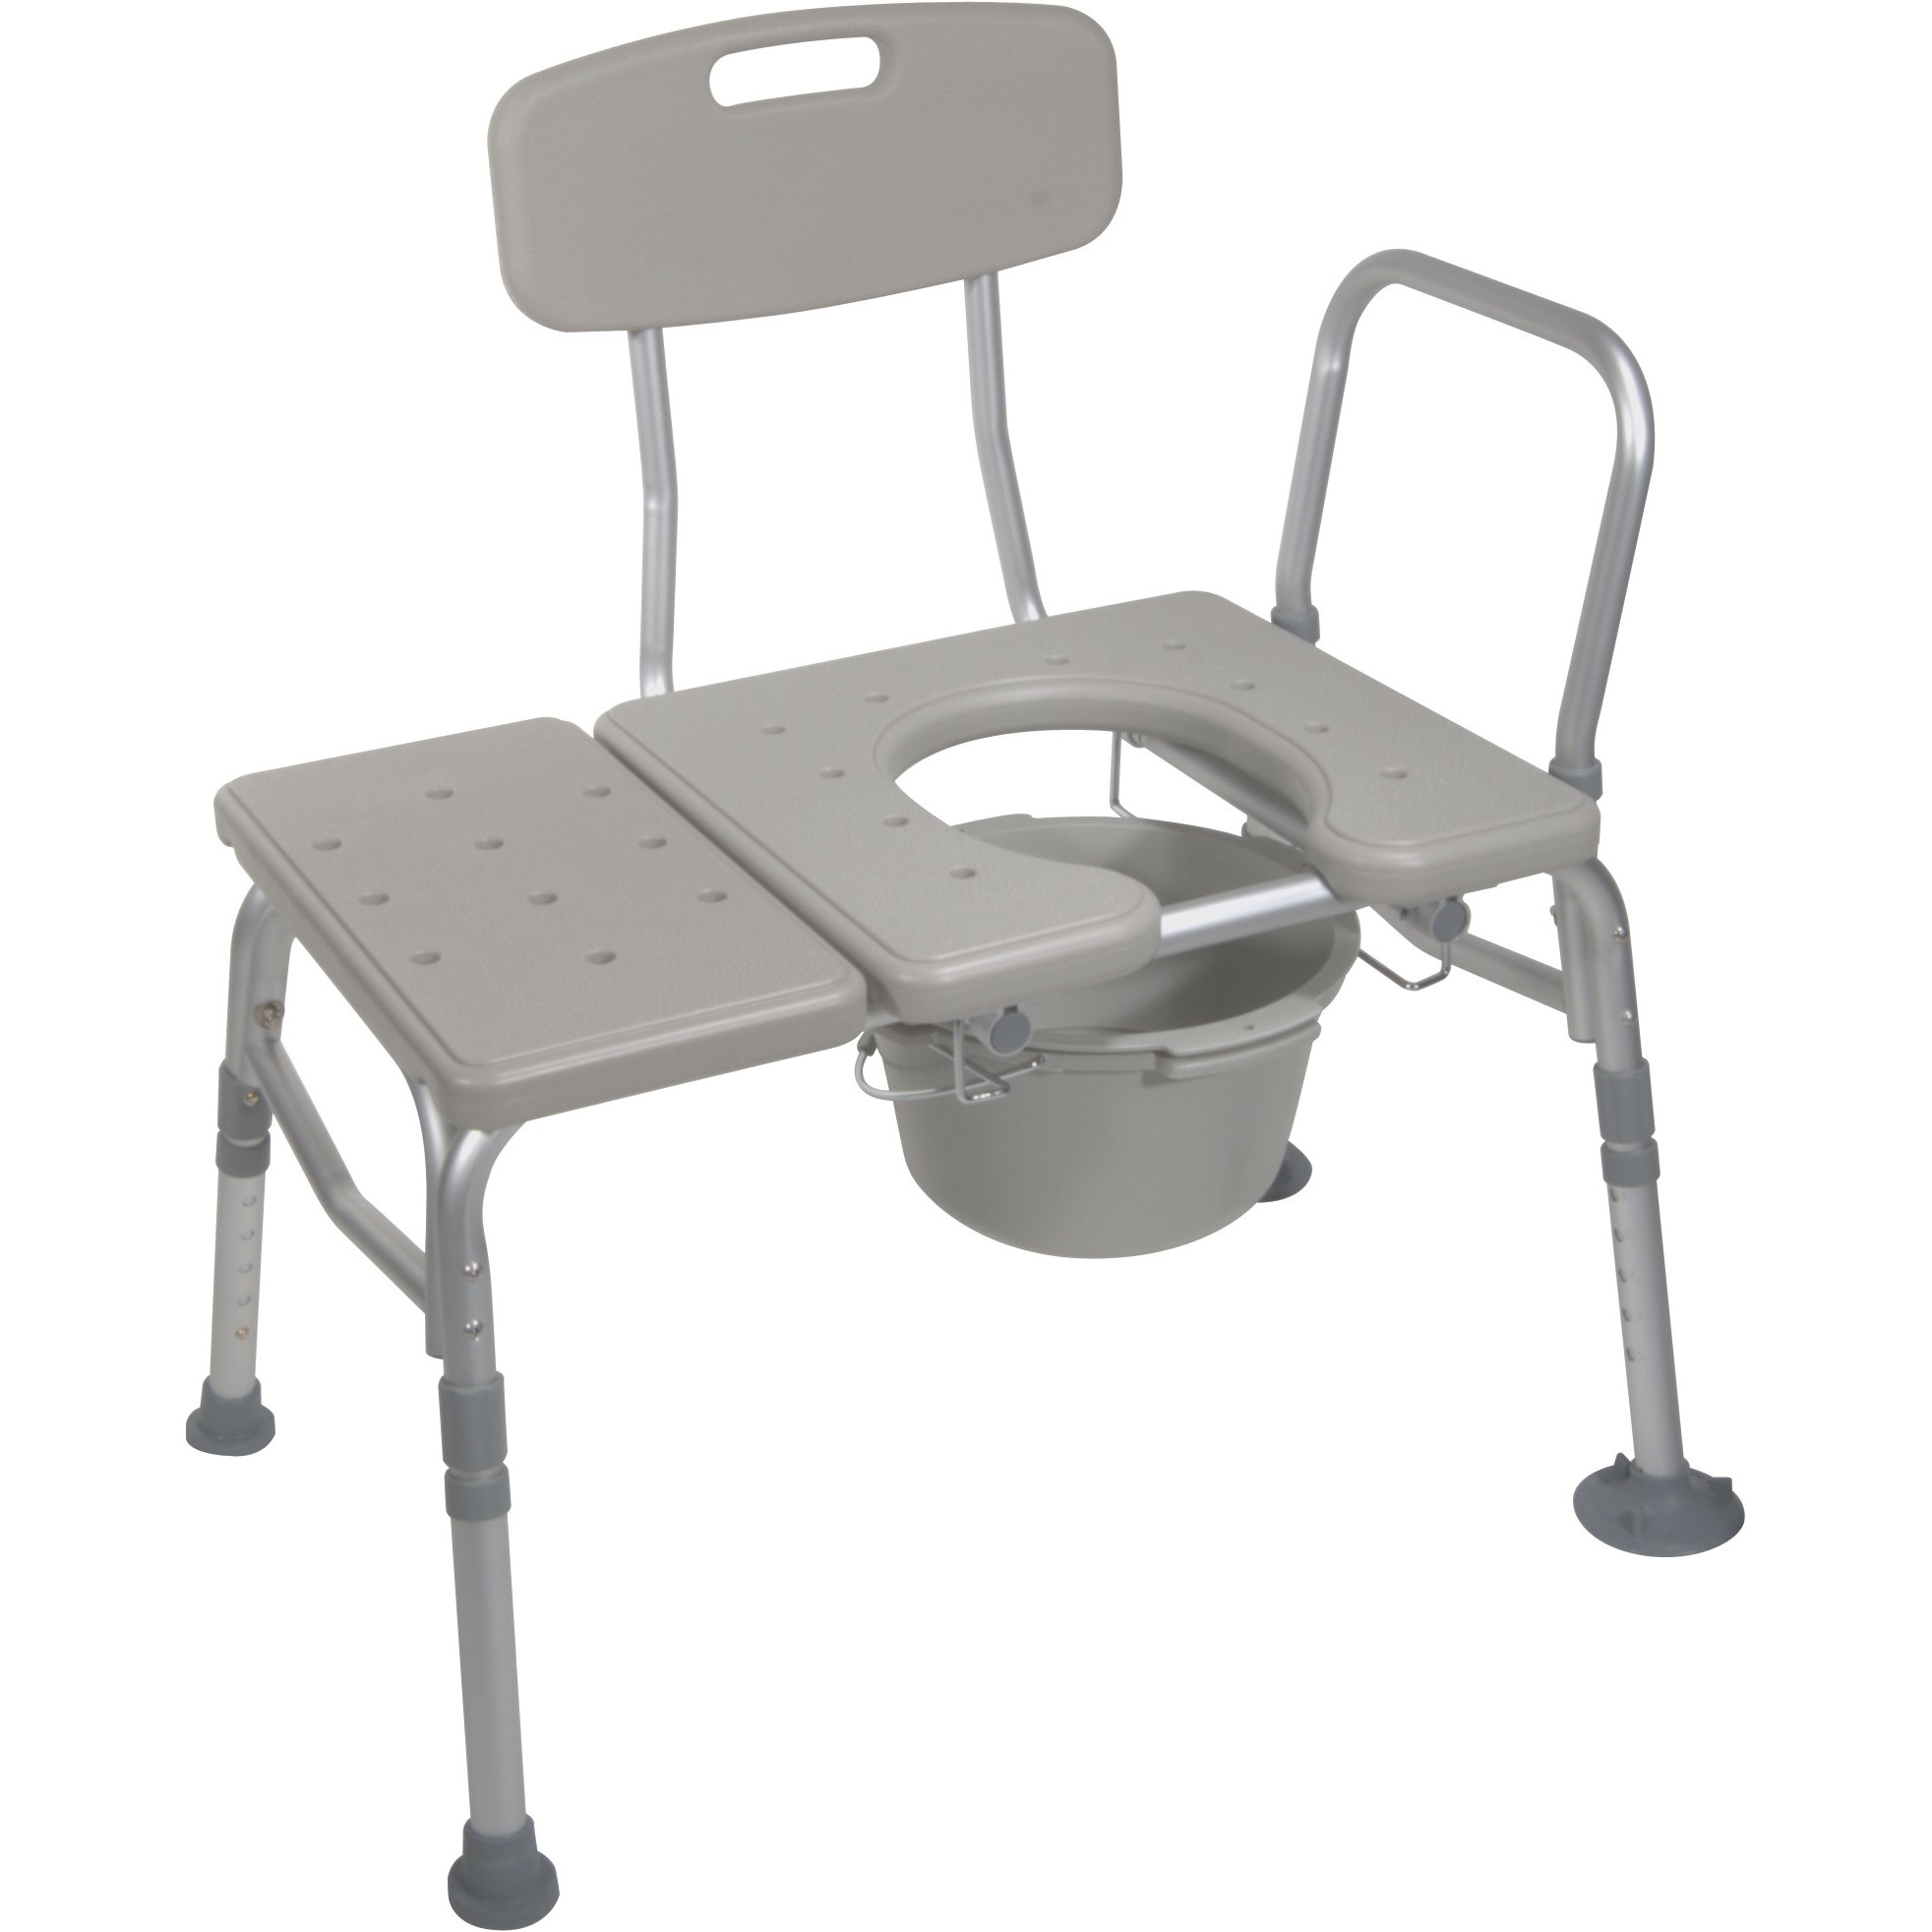 Combination Transfer Bench/Commode